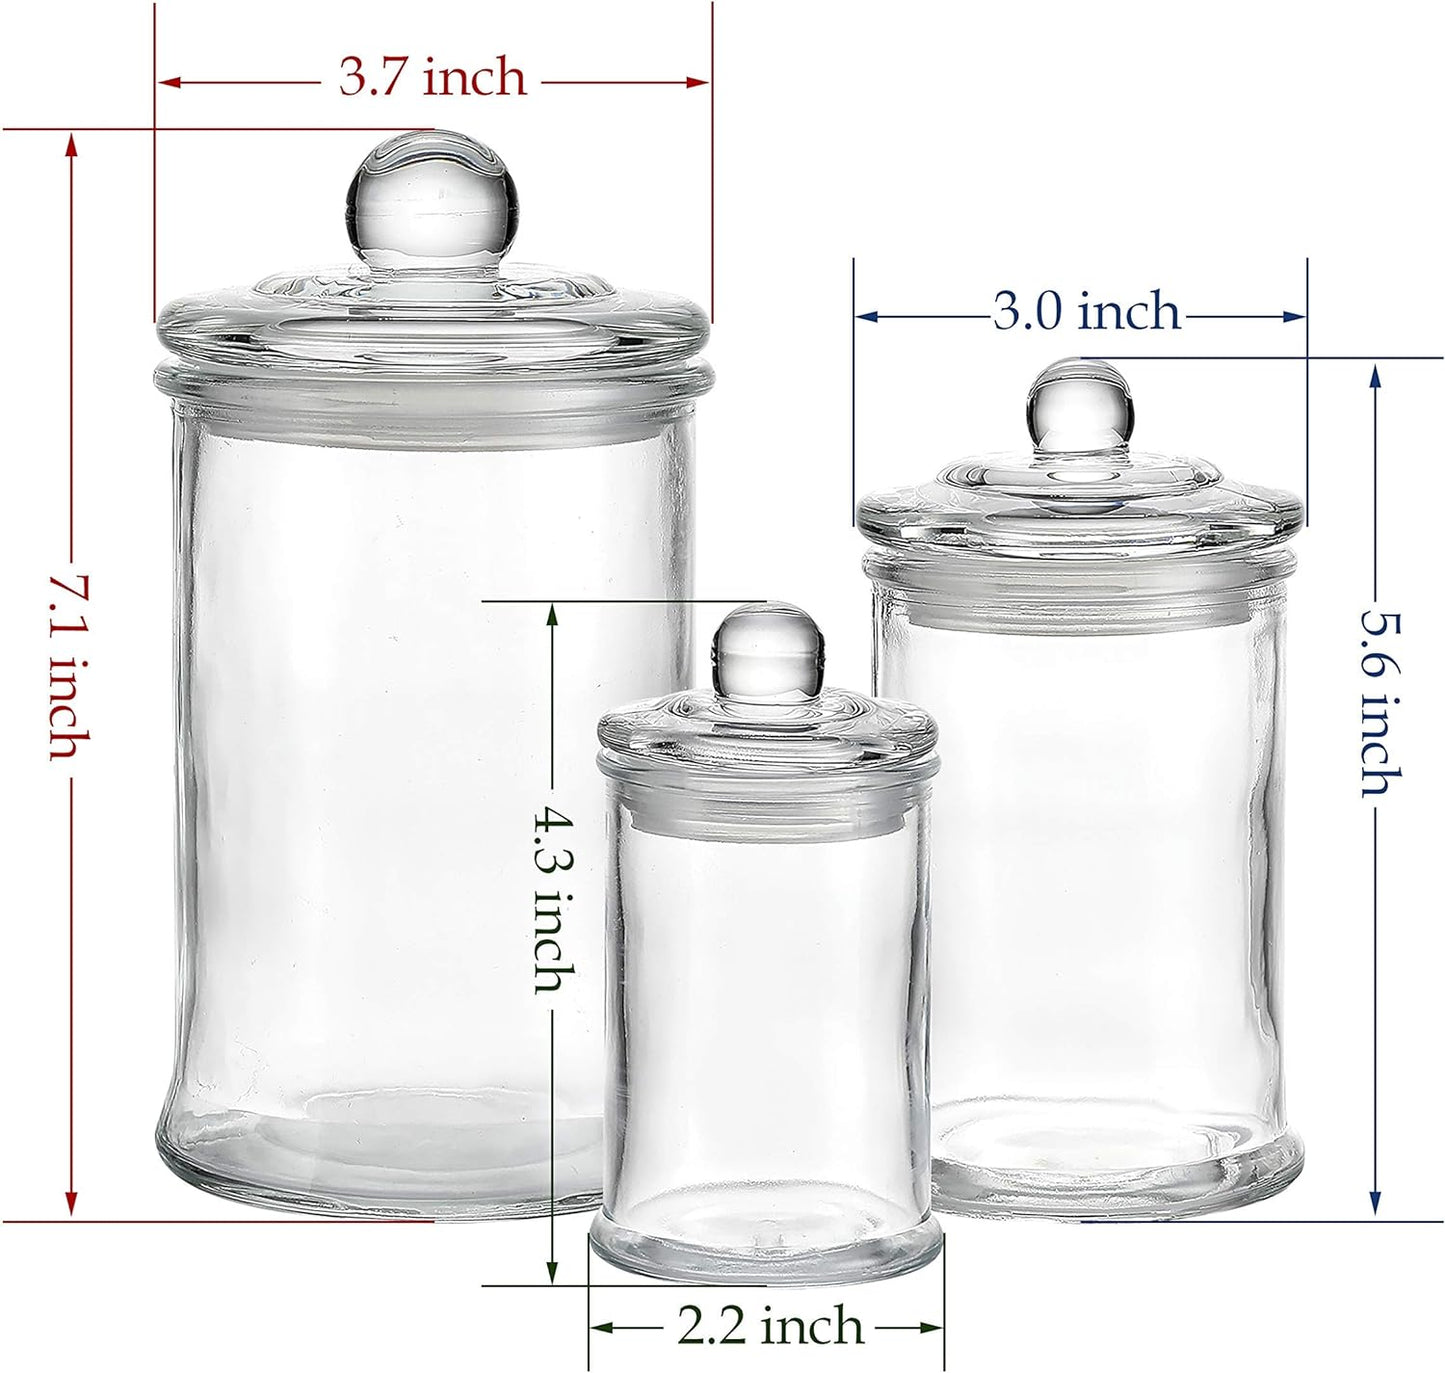 3Pcs Set Small Mini Clear Glass Premium Quality Apothecary Jars with Lids Bathroom Accessories Set for Bathroom Laundry Room Storage or Kitchen / Vanity Organizer Canisters for Cotton Balls / Swabs, Makeup Sponges, Bath Salts, Q-Tips (Clear)